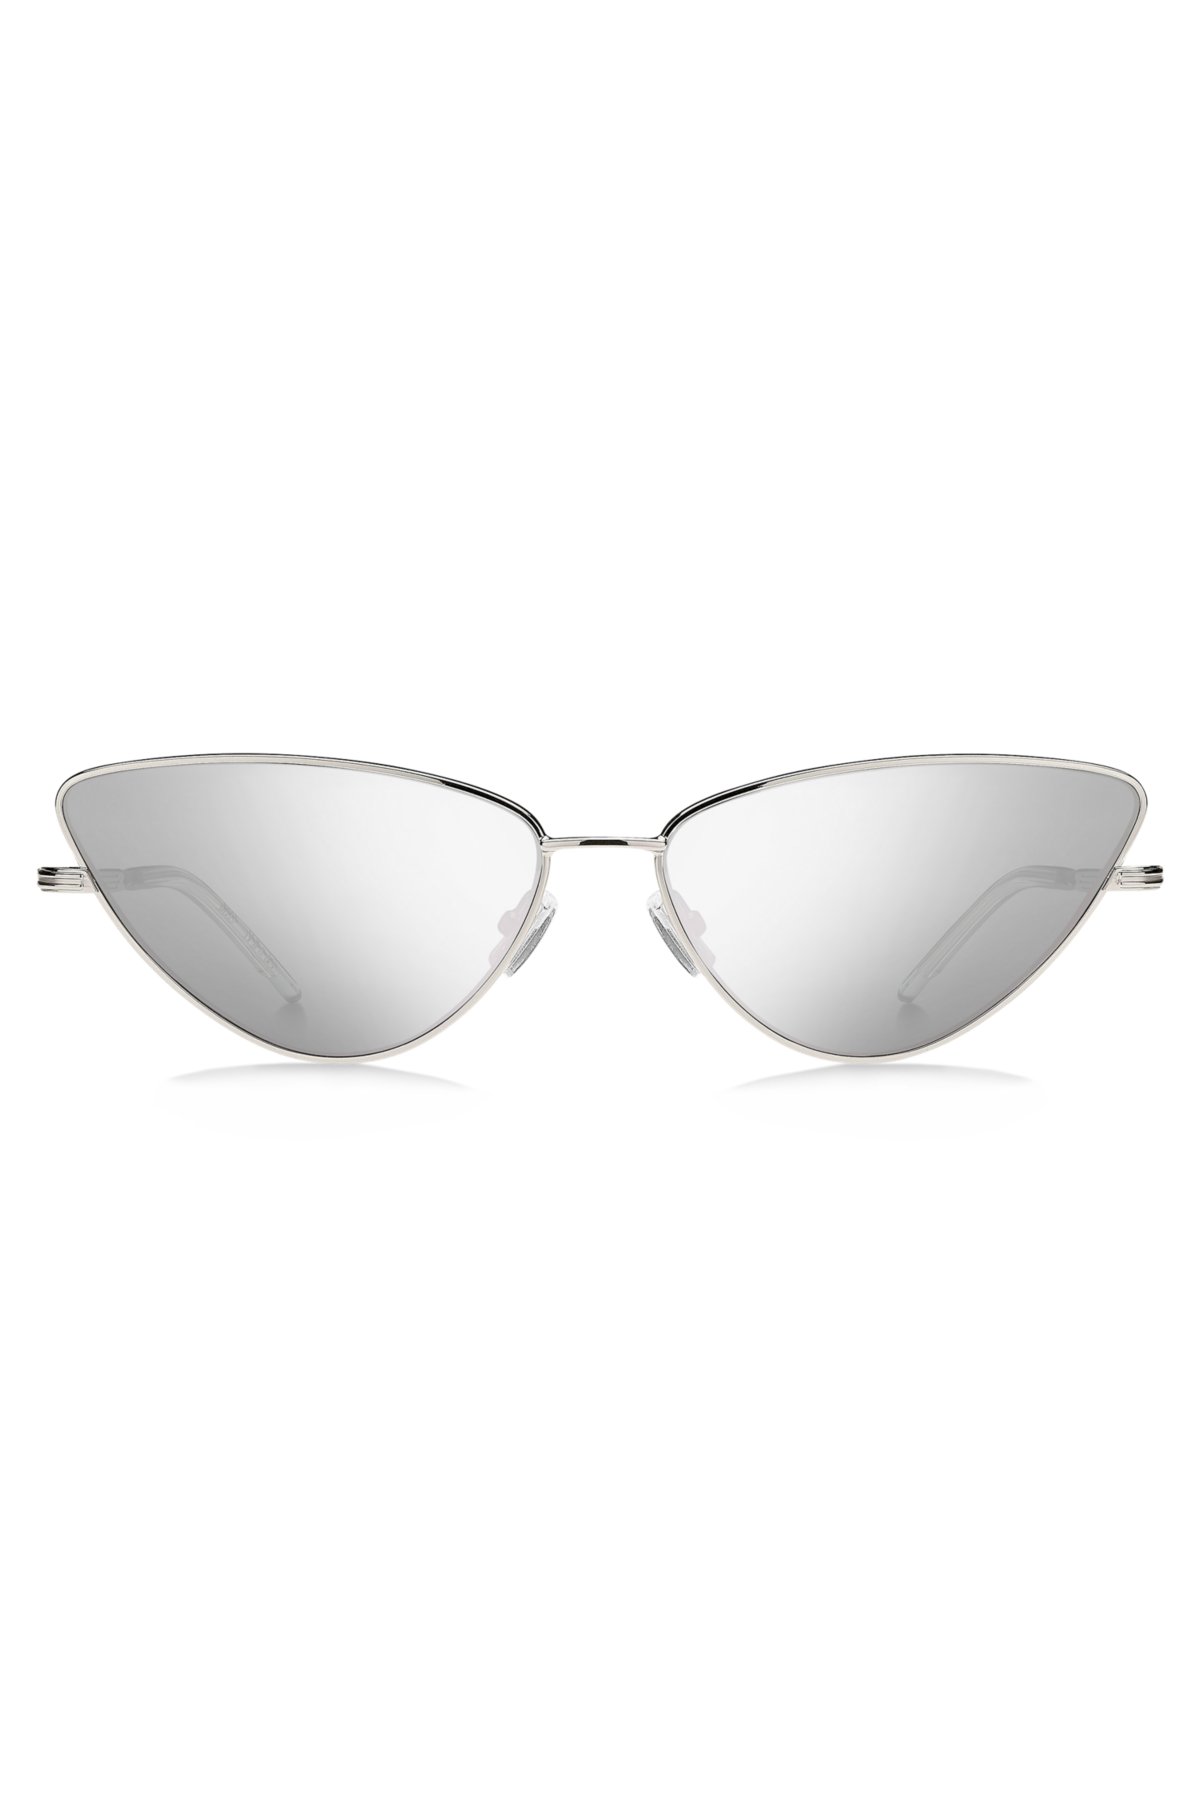 BOSS - Cat-eye sunglasses in steel with signature details